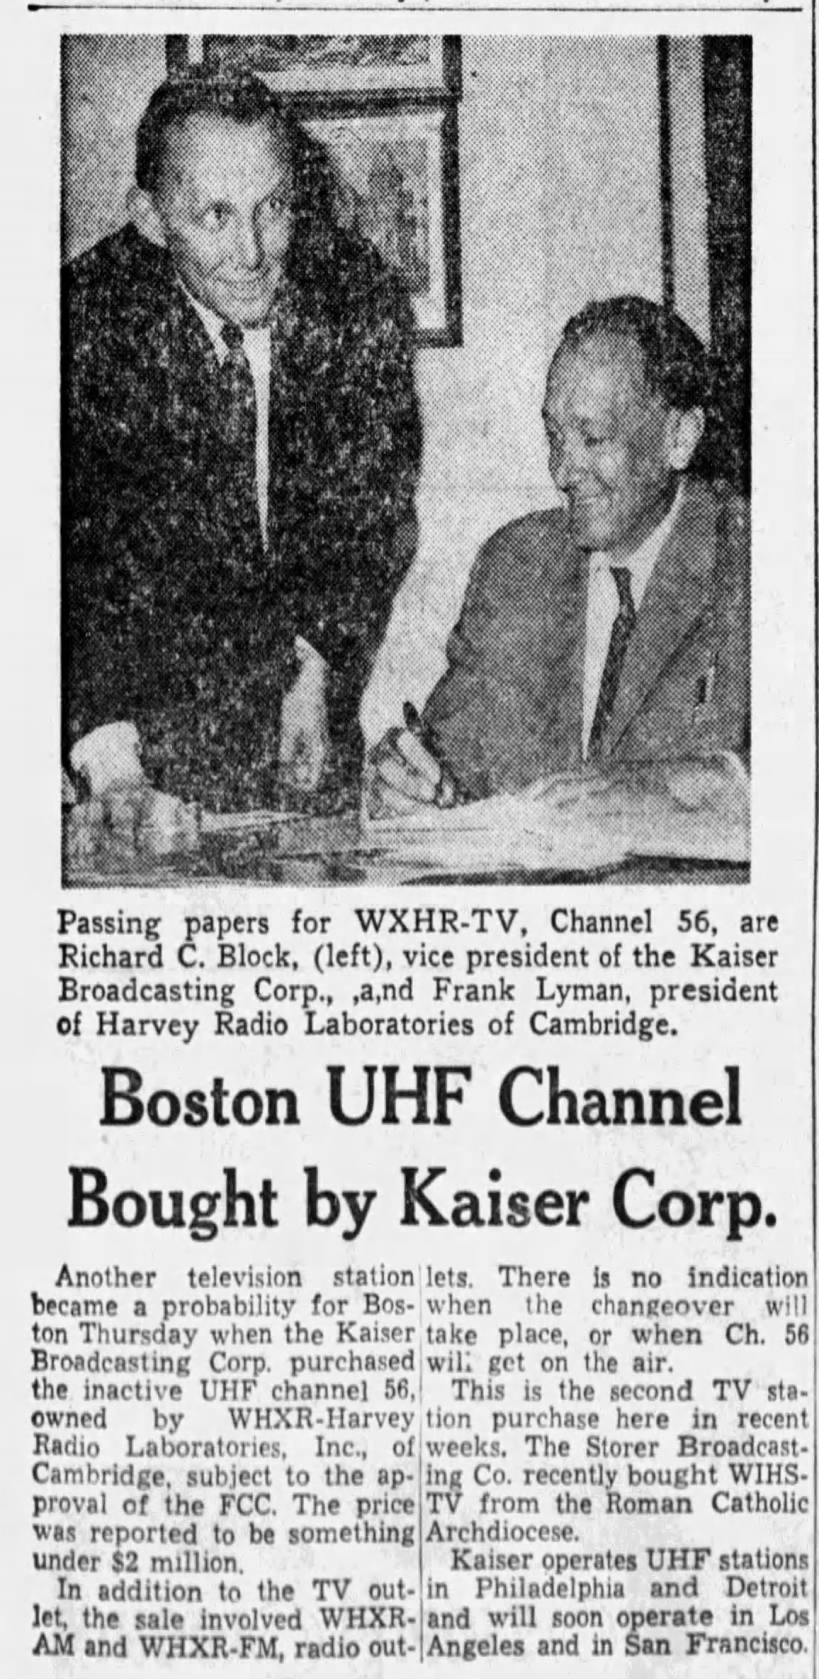 Boston UHF Channel Bought by Kaiser Corp.